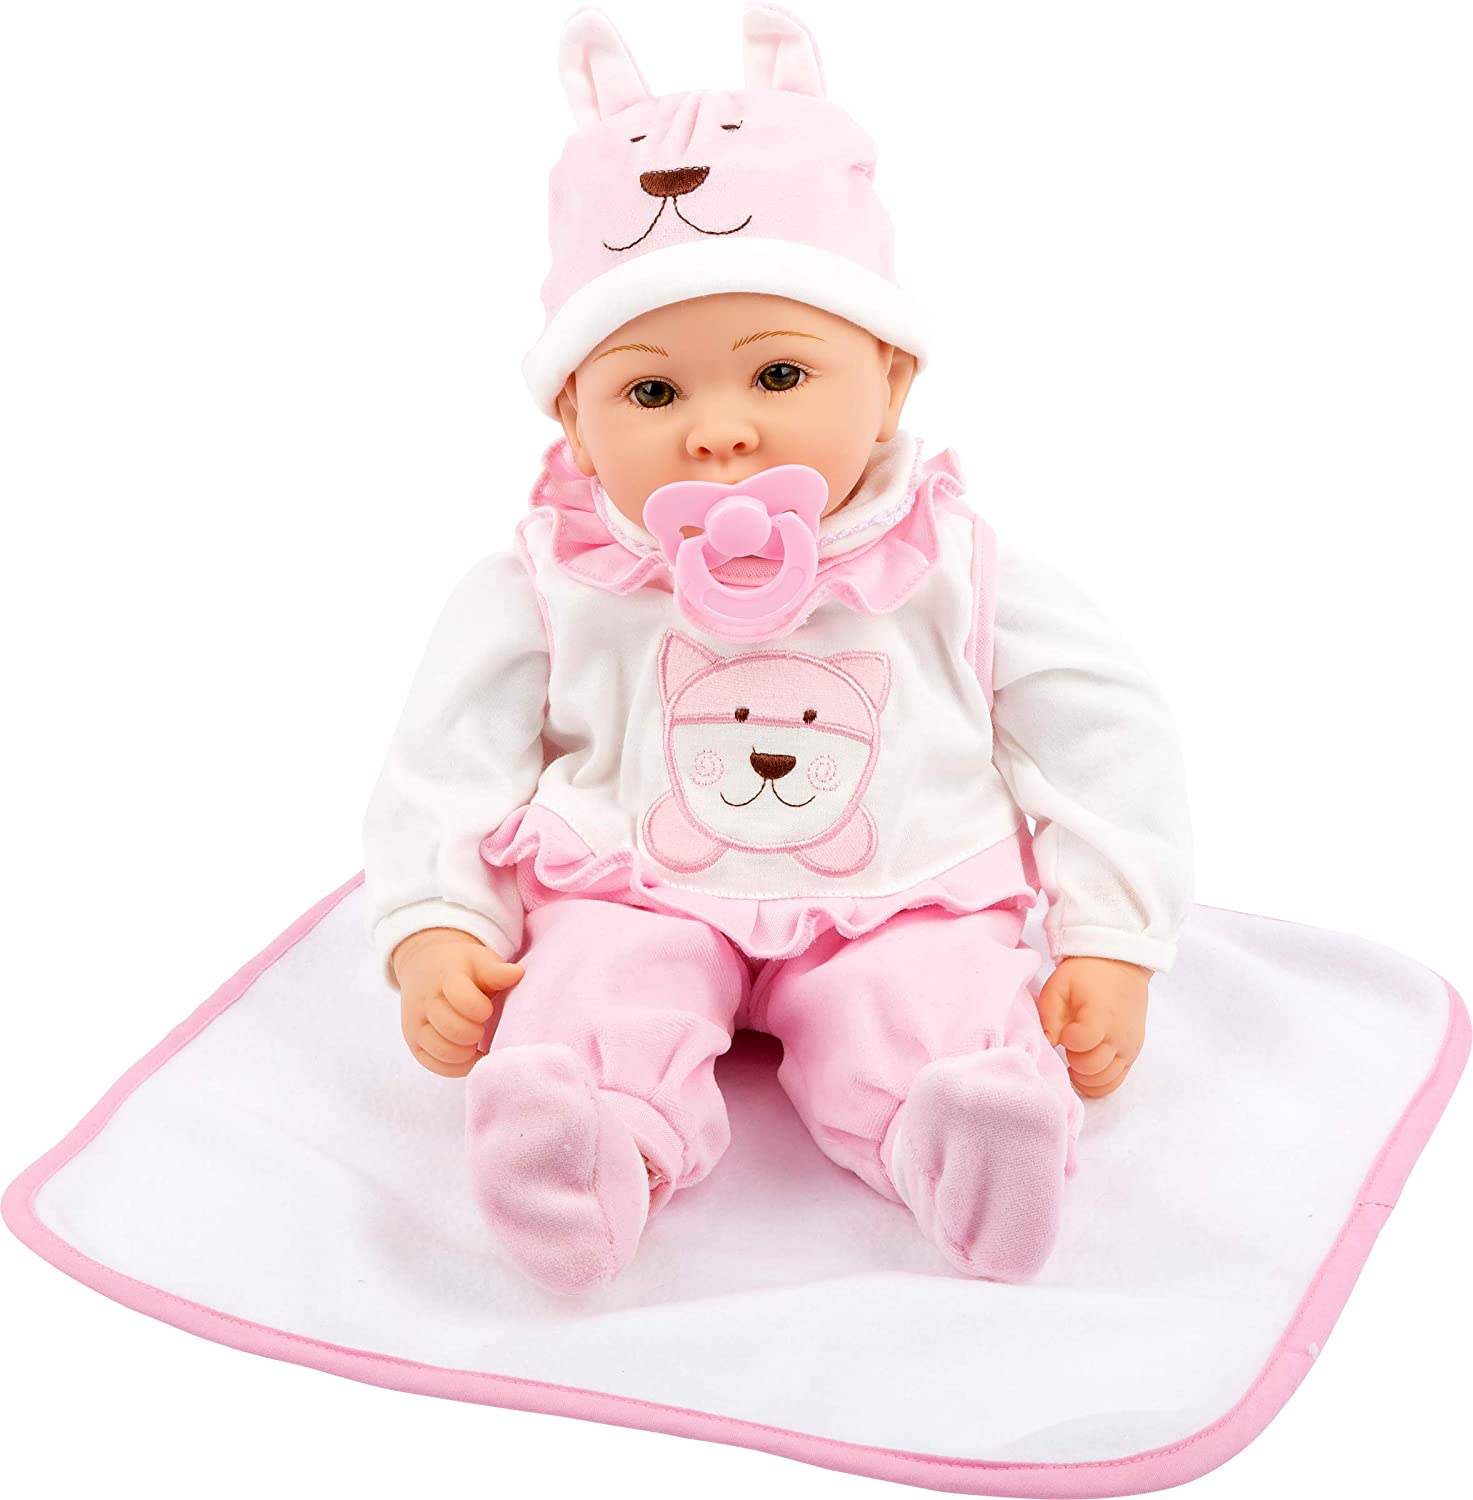 Small Foot Company (HANDY) Small Foot 2735 Baby Doll Emily with Soft Body Including Blanket, Hat, Romper and Dummy 40 cm from 2 Years